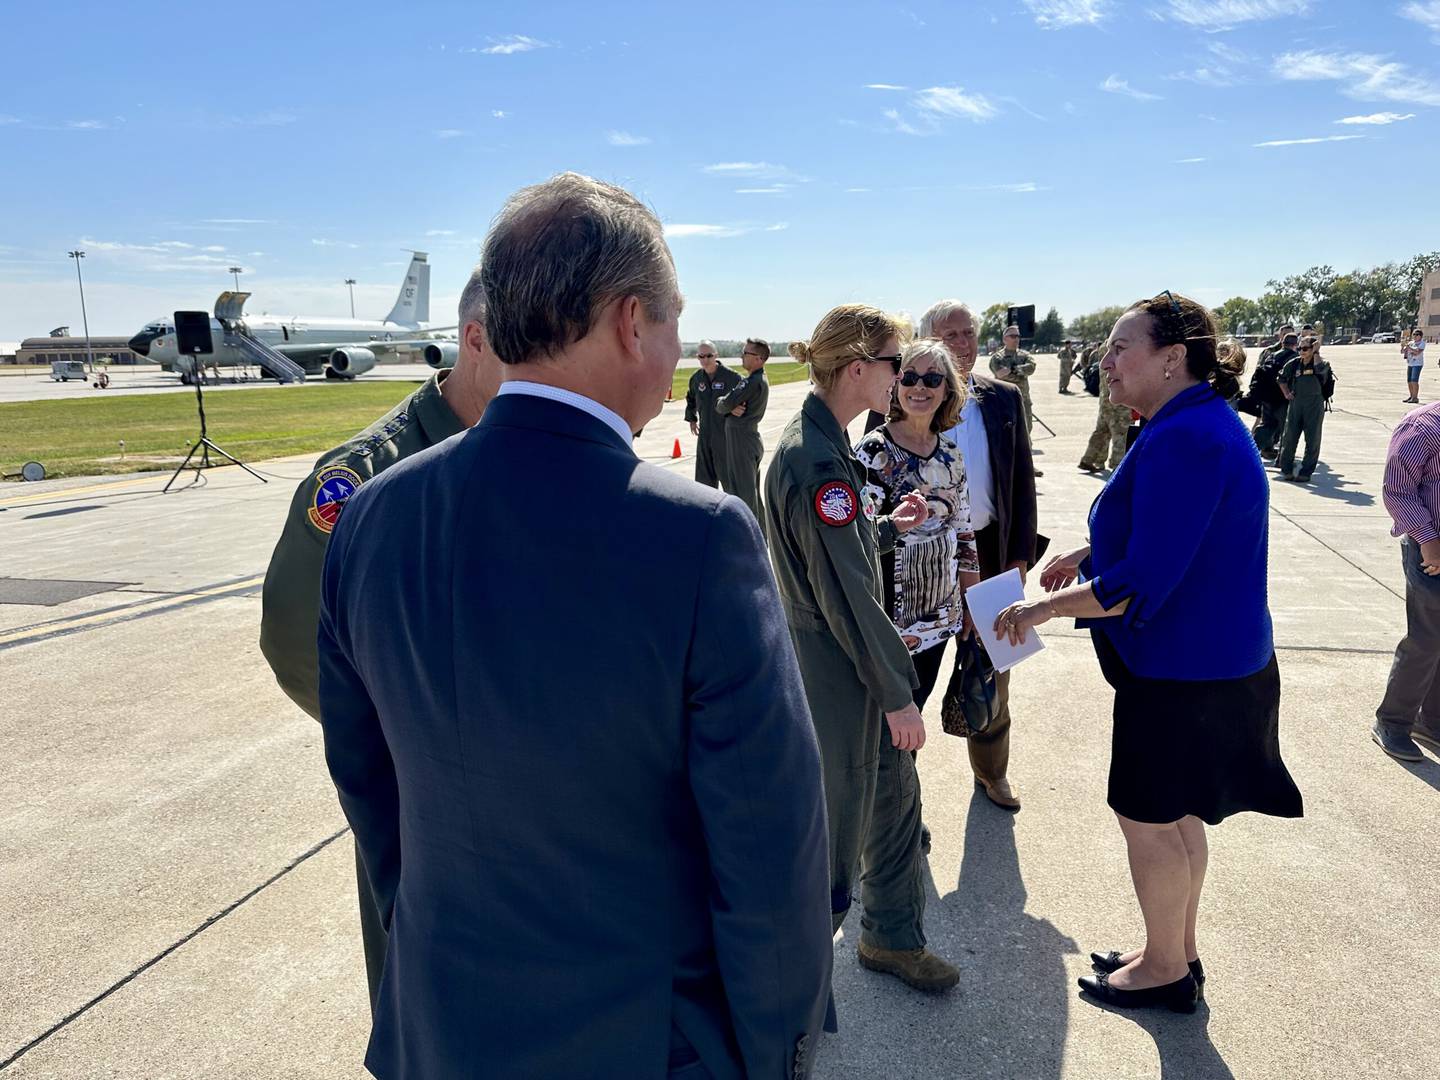 U.S. Sen. Deb Fischer (right) speaks to Col. Kristen Thompson (left), commander of the 55th Wing, as Rep. Don Bacon, R-Neb., looks on, at Offutt Air Force Base on Sept. 30, 2022.